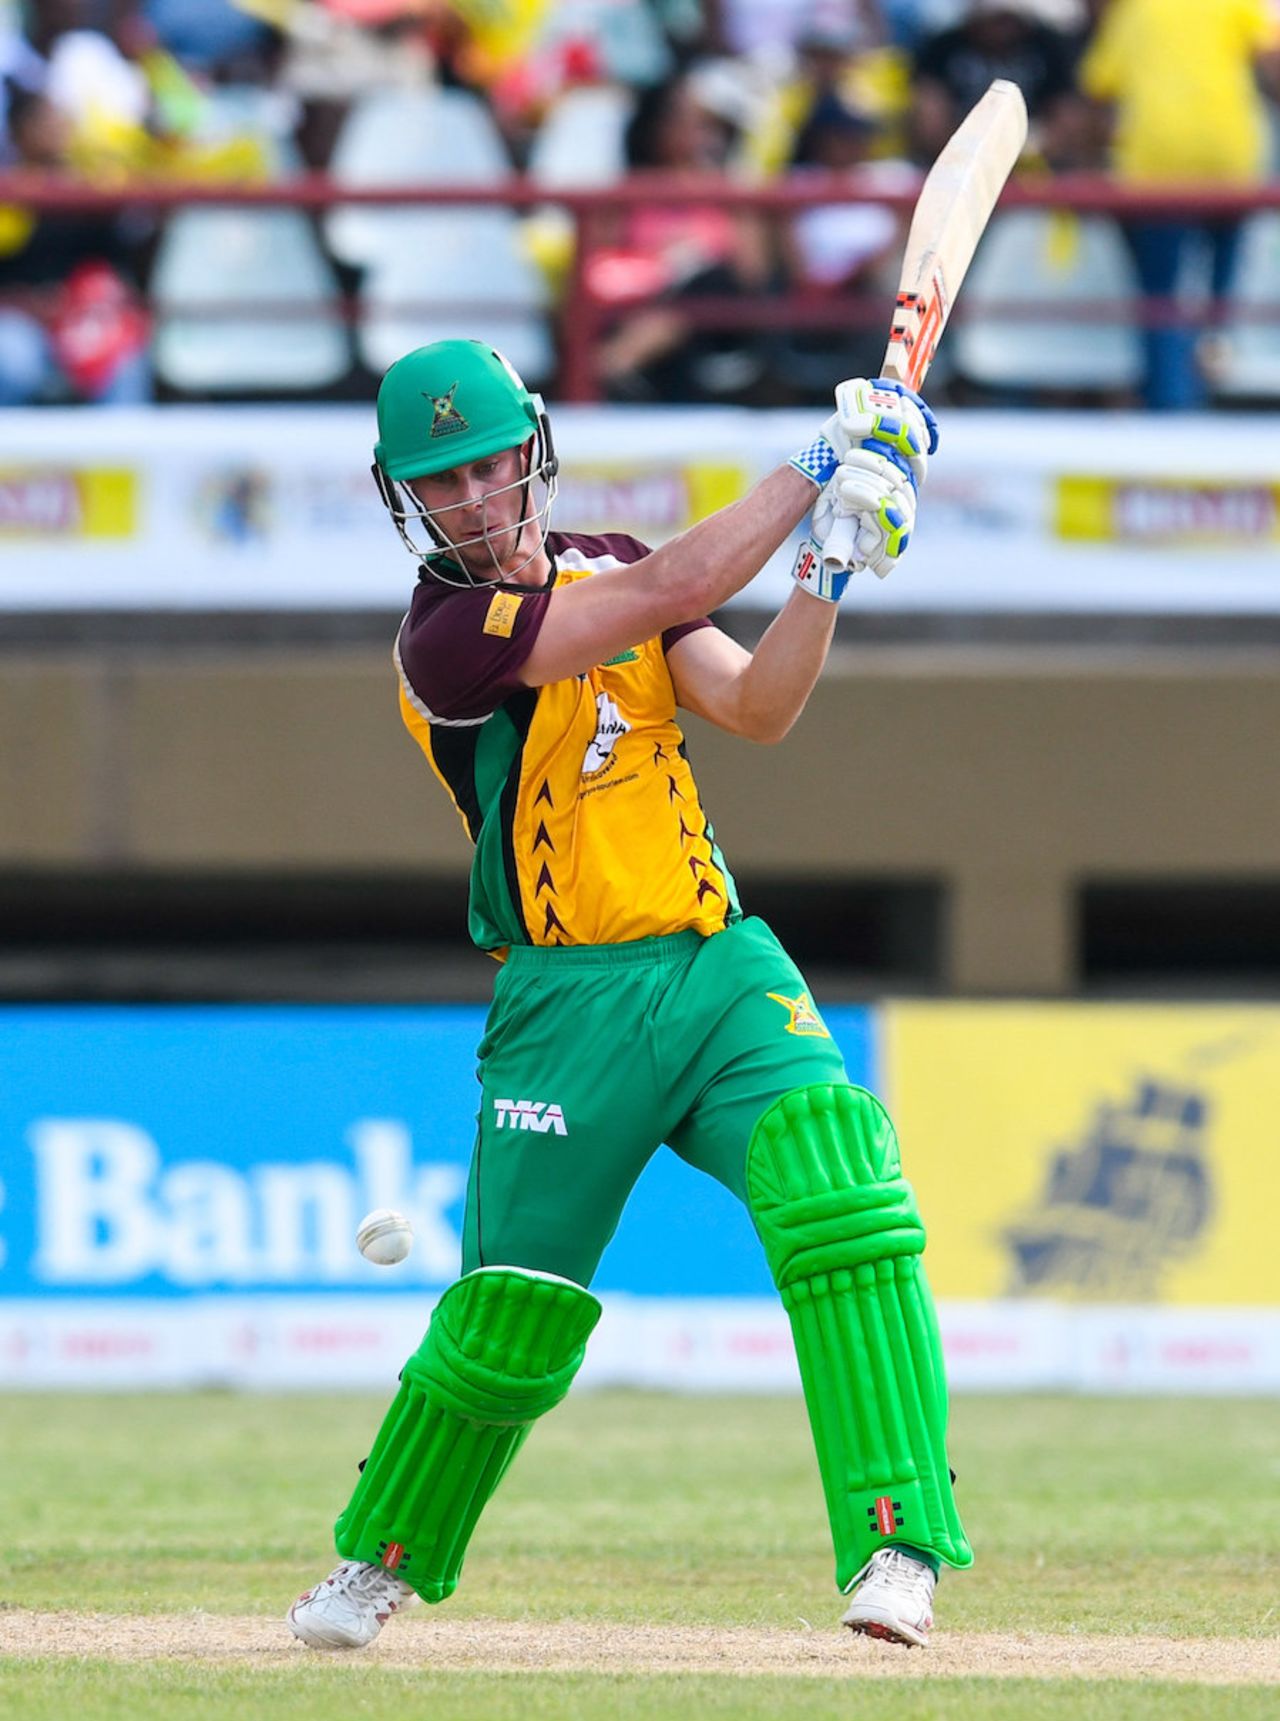 Chris Lynn hits out during his knock of 34, Guyana Amazon Warriors v St Kitts and Nevis Patriots, CPL 2016, Providence, July 9, 2016